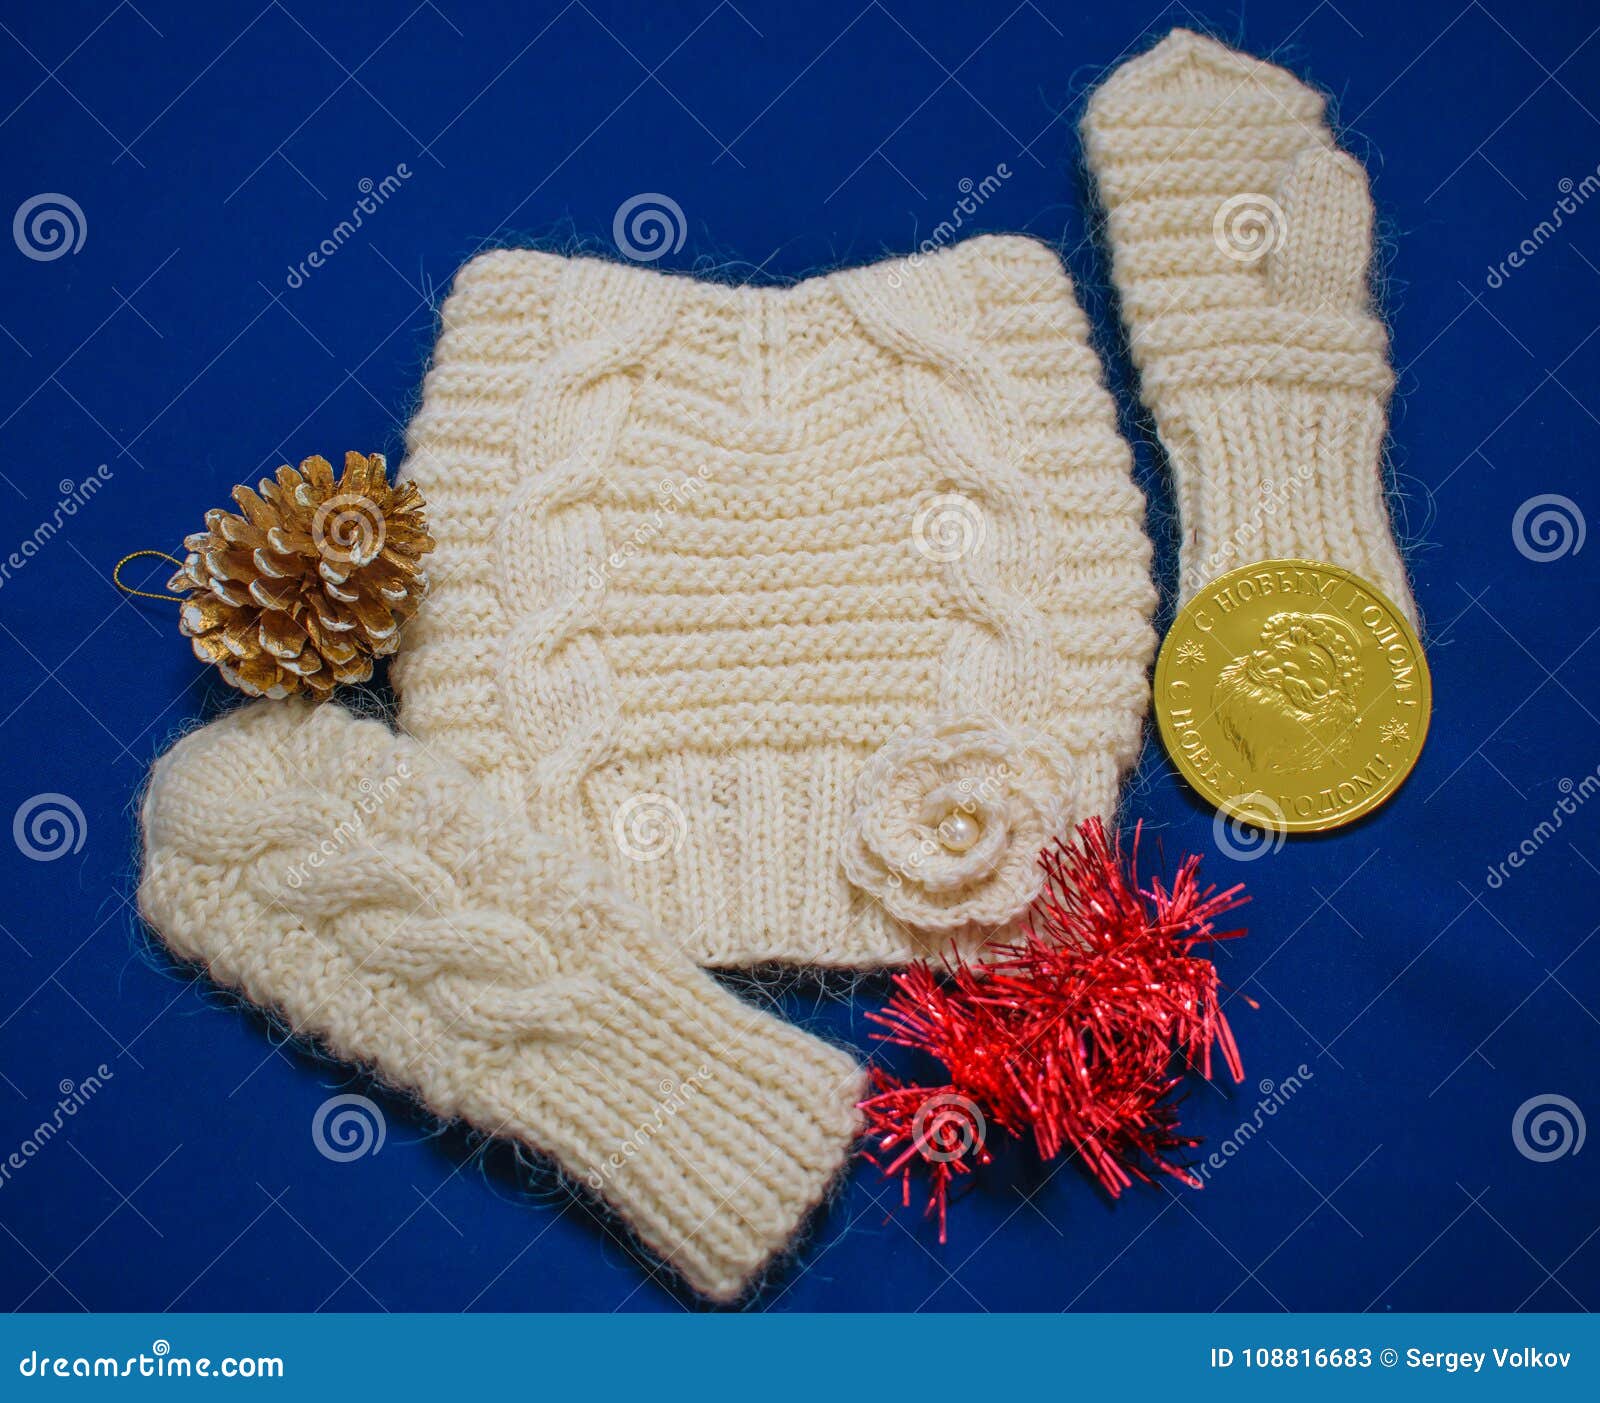 Baby Hat And Mittens On Blue Background Stock Image Image